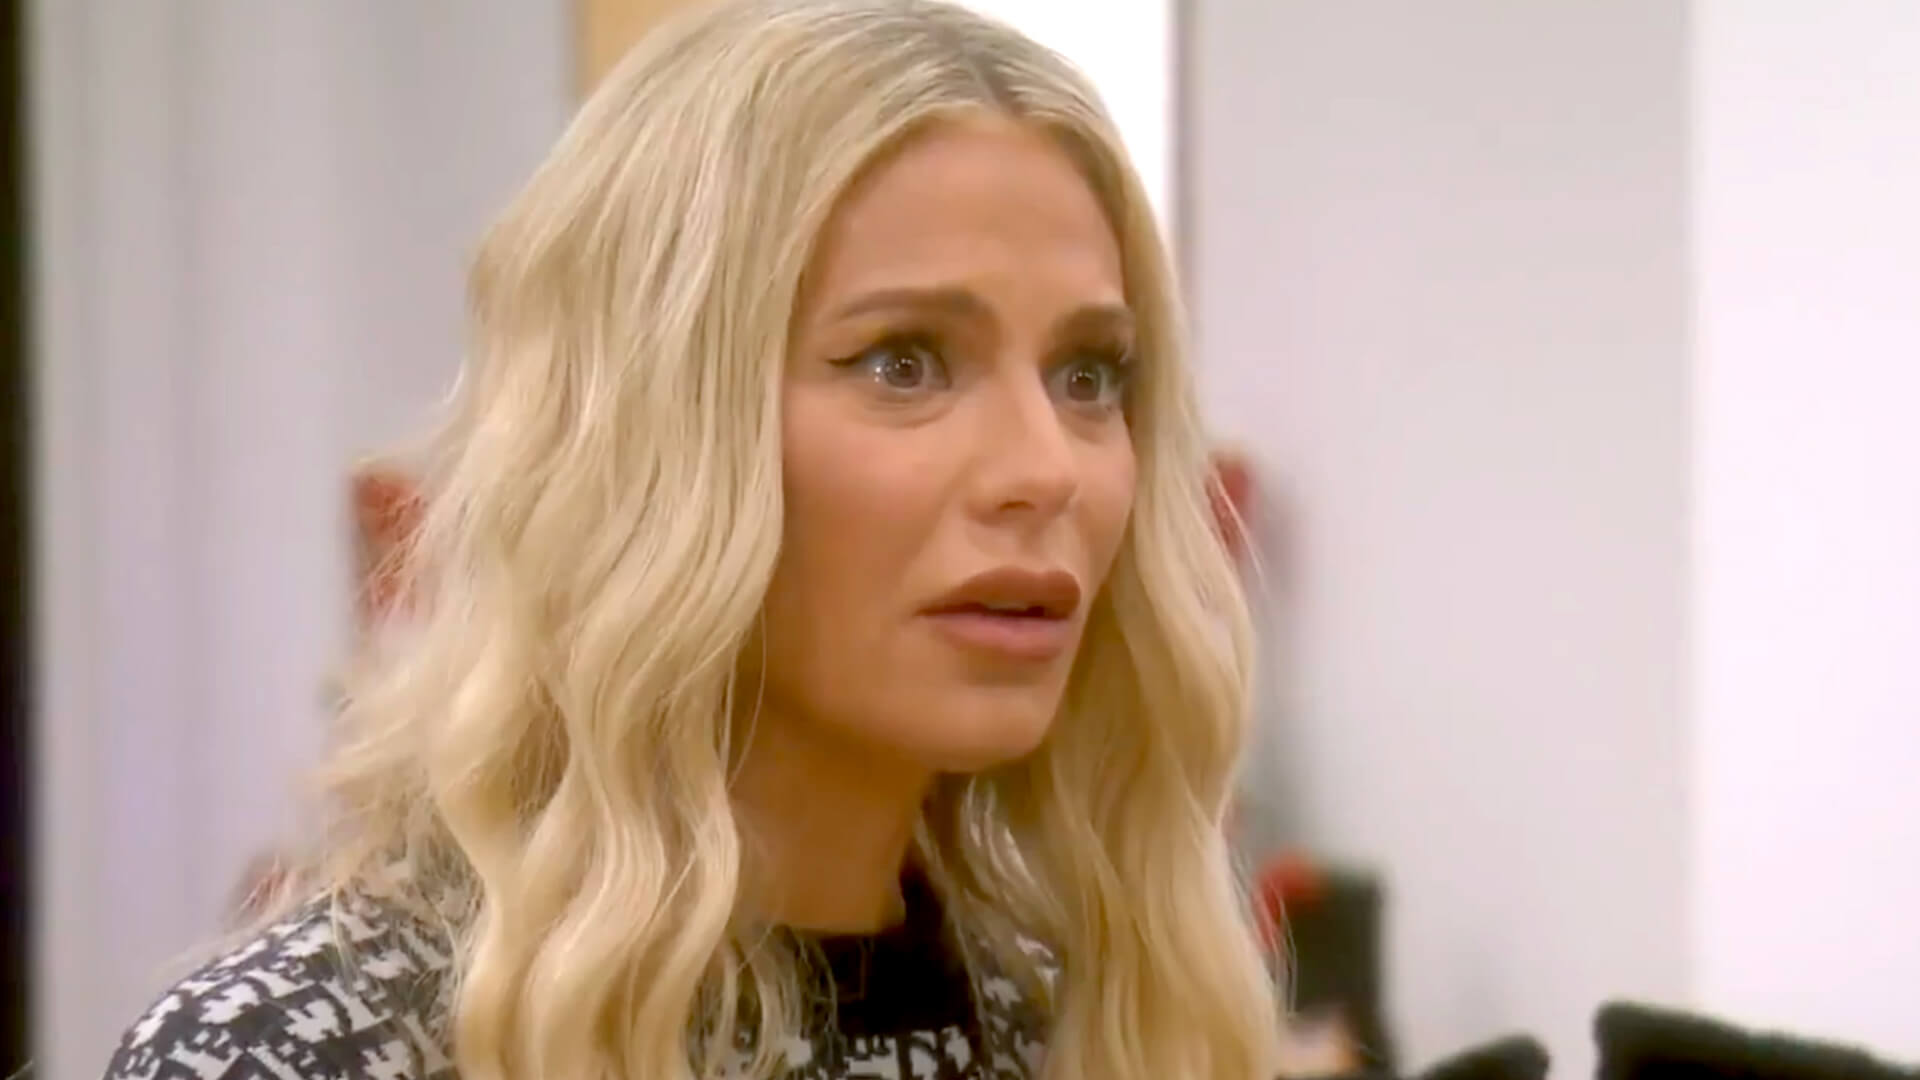 ‘RHOBH’ RECAP: The Ladies Question Erika’s Truth & Suspect They’ve Been ‘Duped By The Lies’ Amid Legal Scandal!